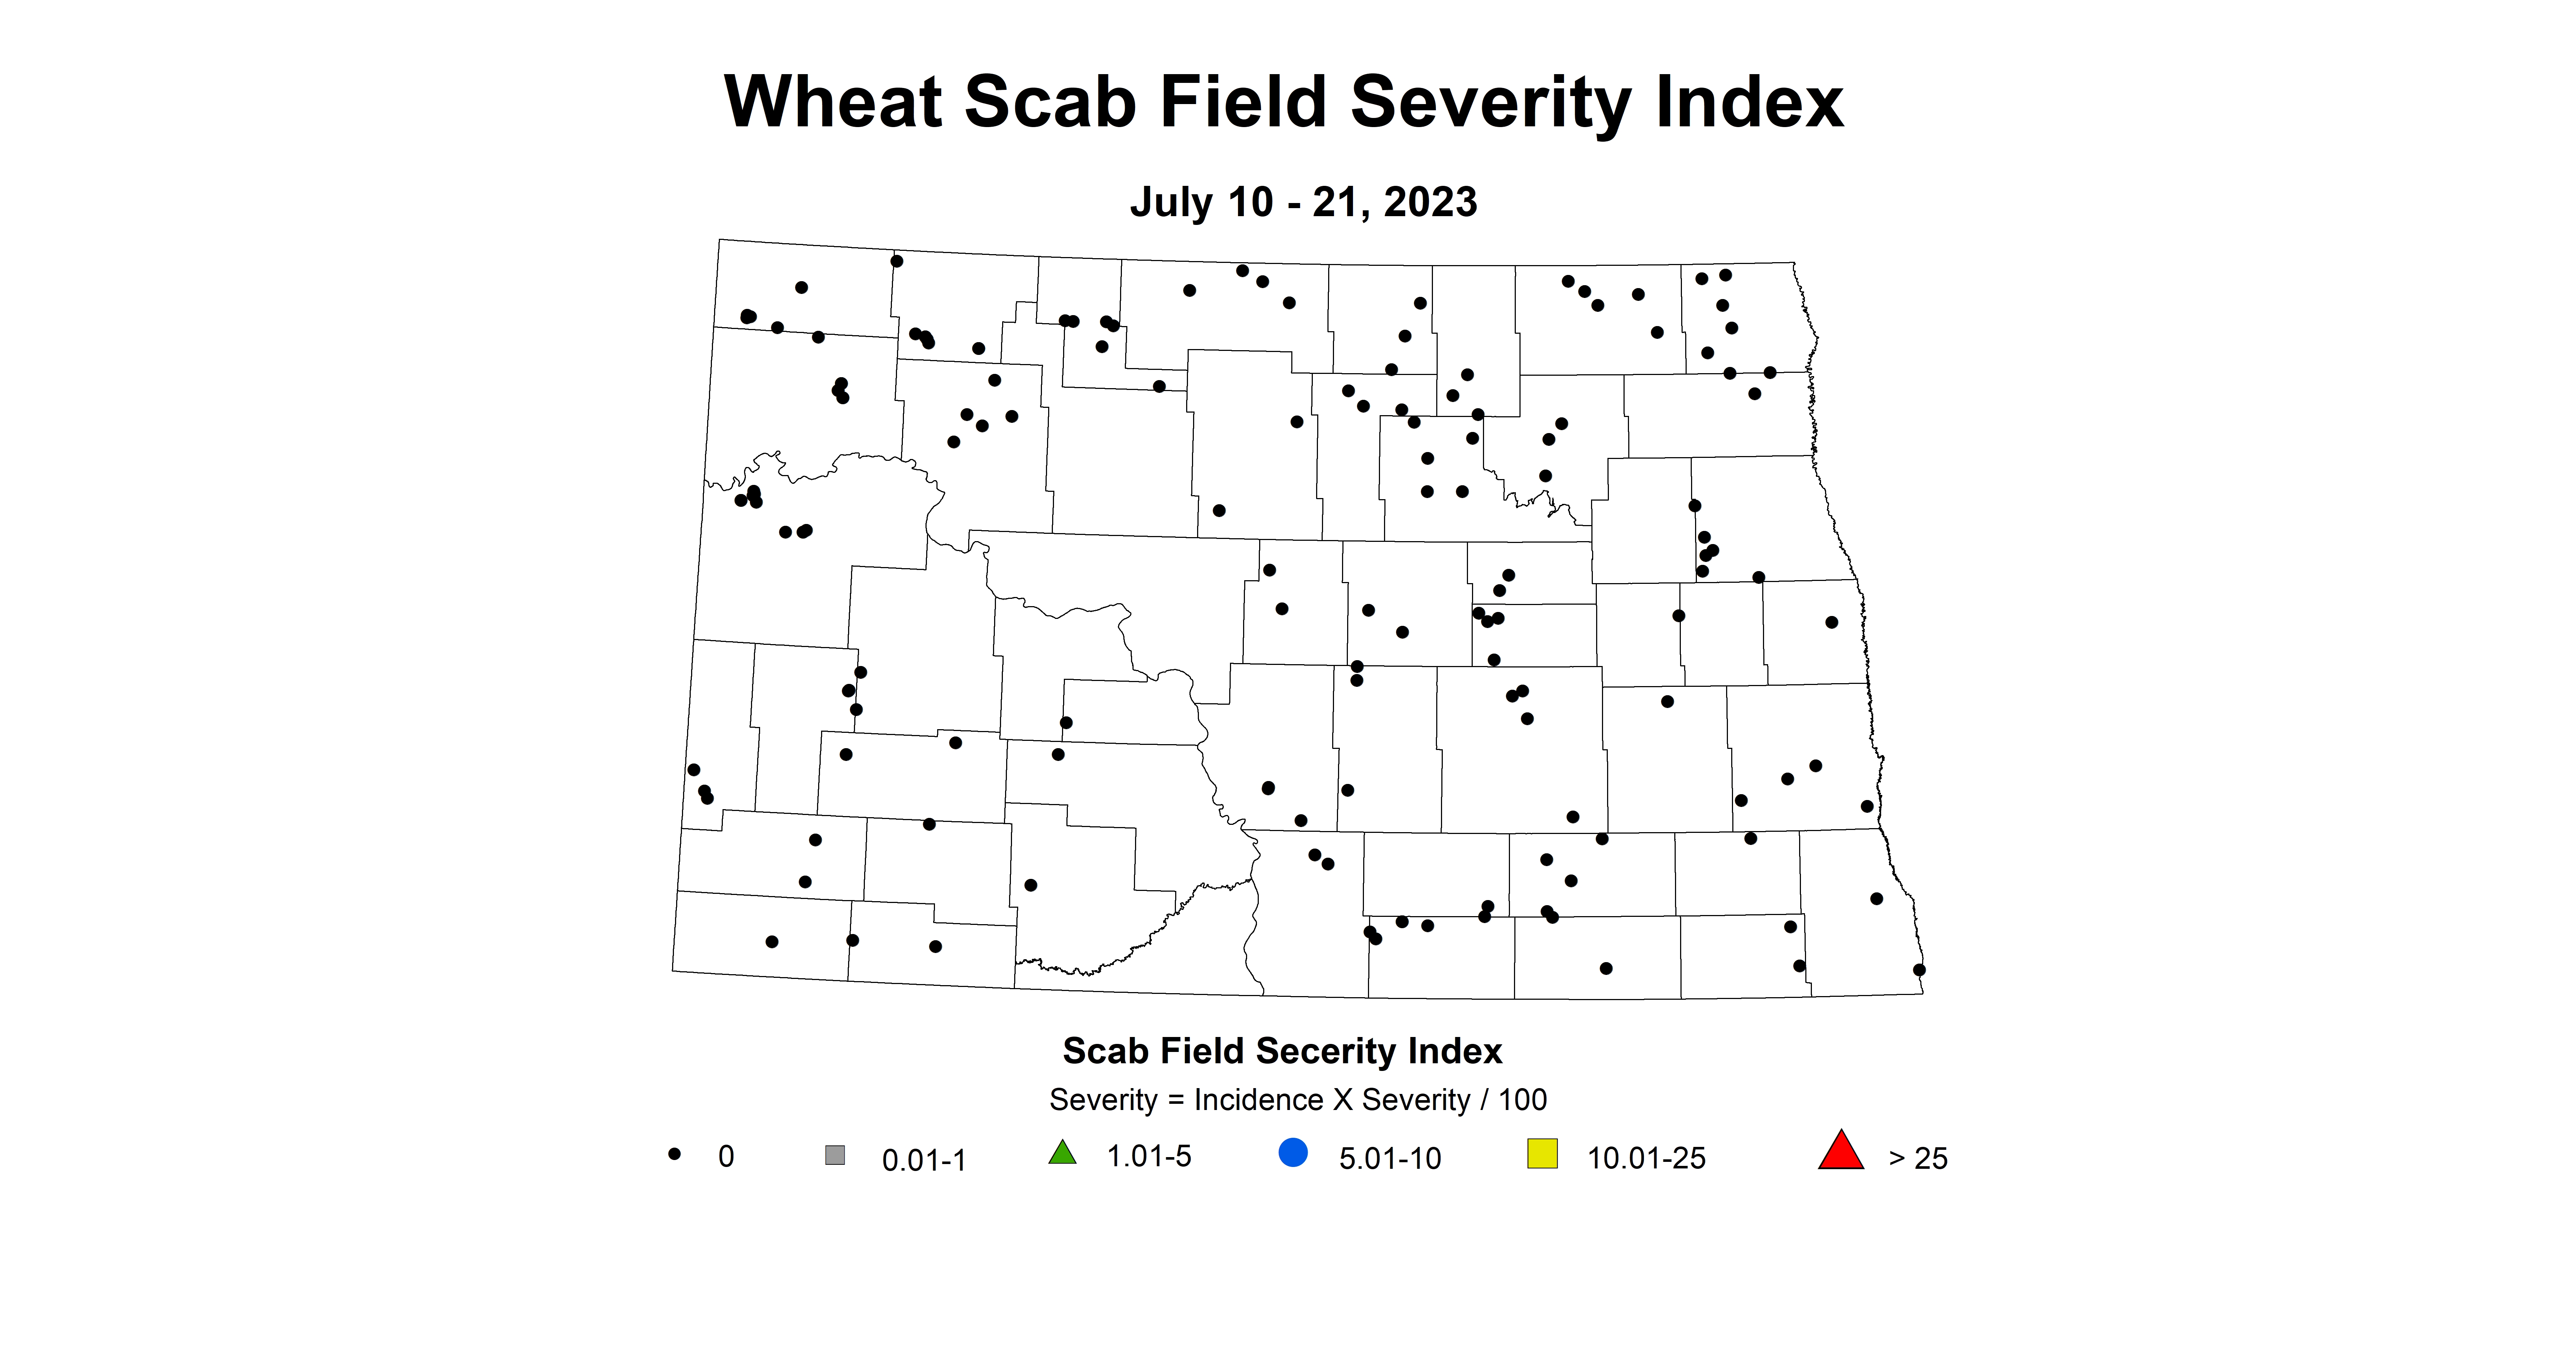 wheat scab field severity index July 10-21 2023